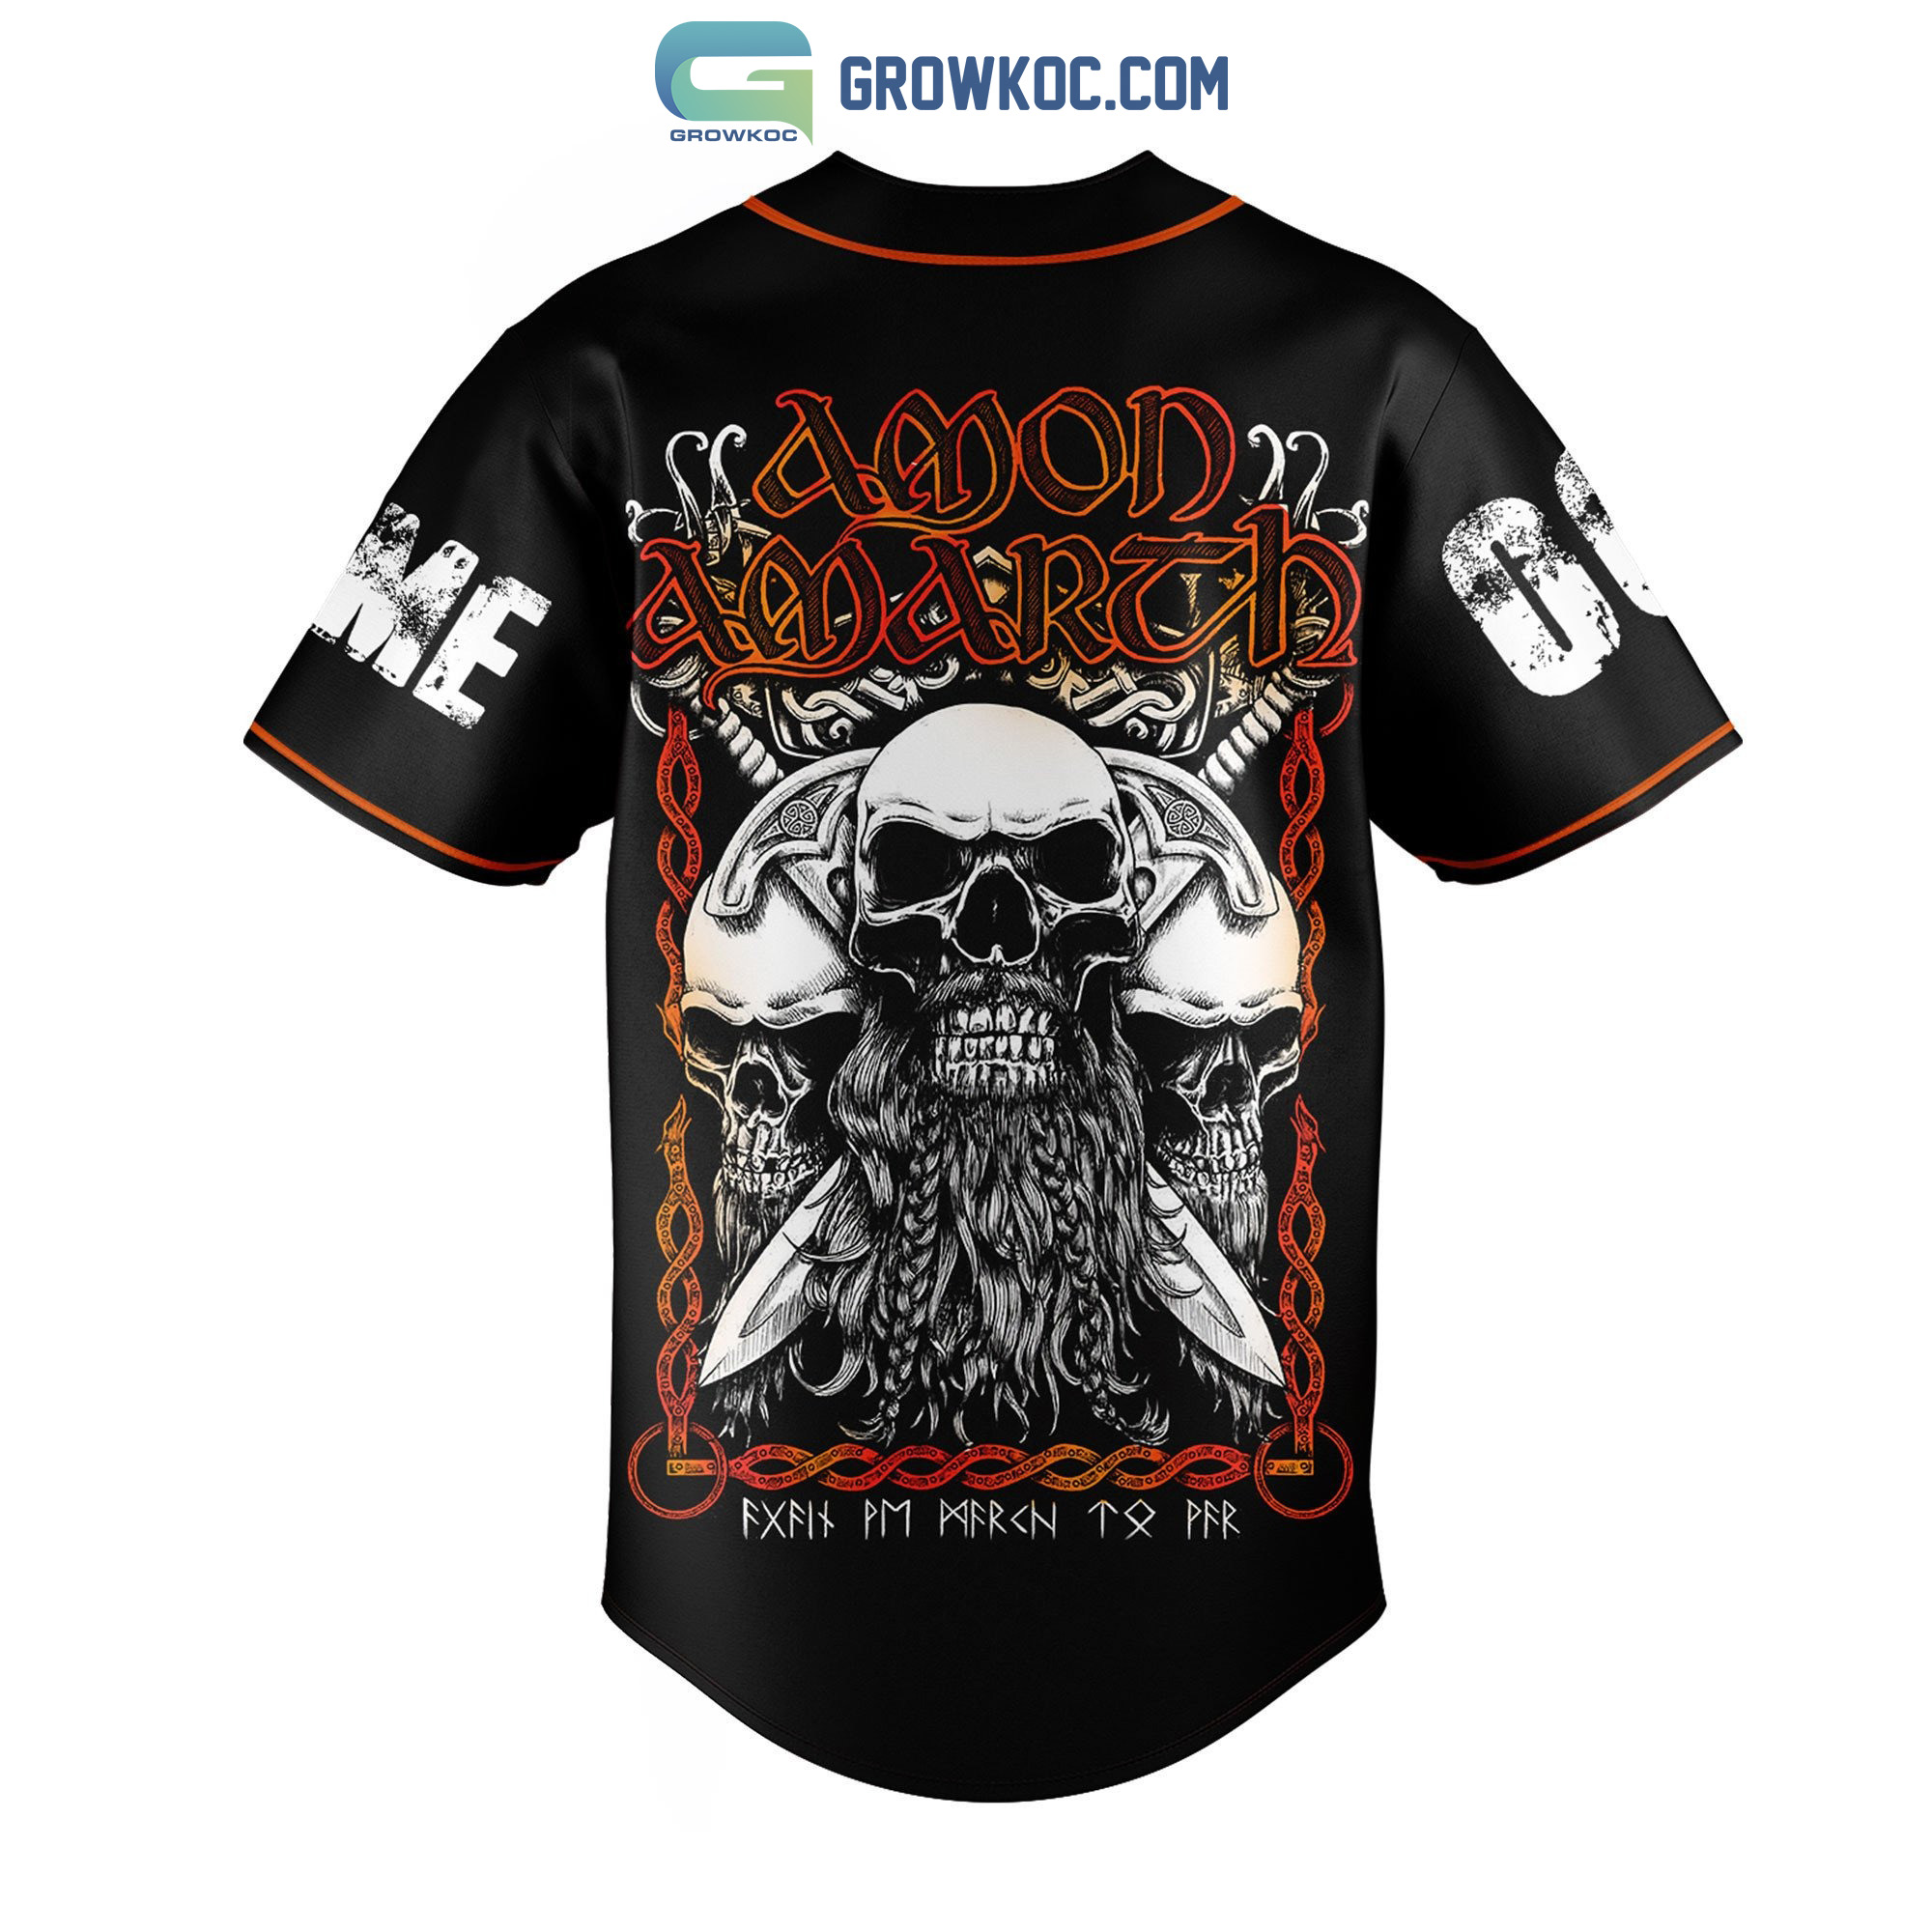 Amon Amarch Once Sent From The Golden Hall Personalized Baseball Jersey